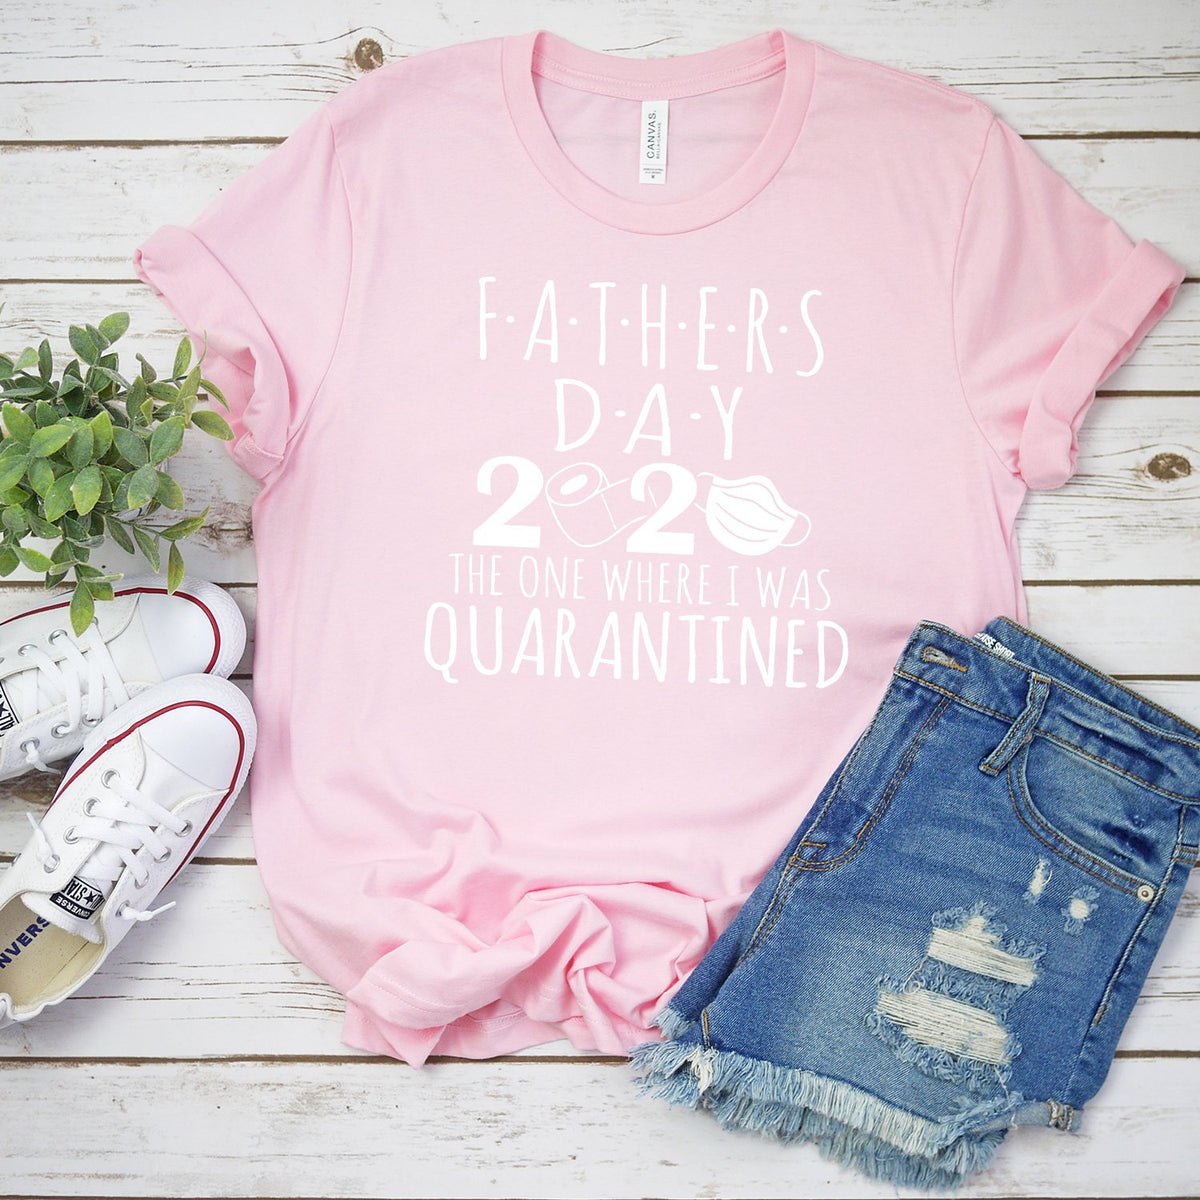 Fathers Day 2020 The One Where I Was Quarantined - Short Sleeve Tee Shirt